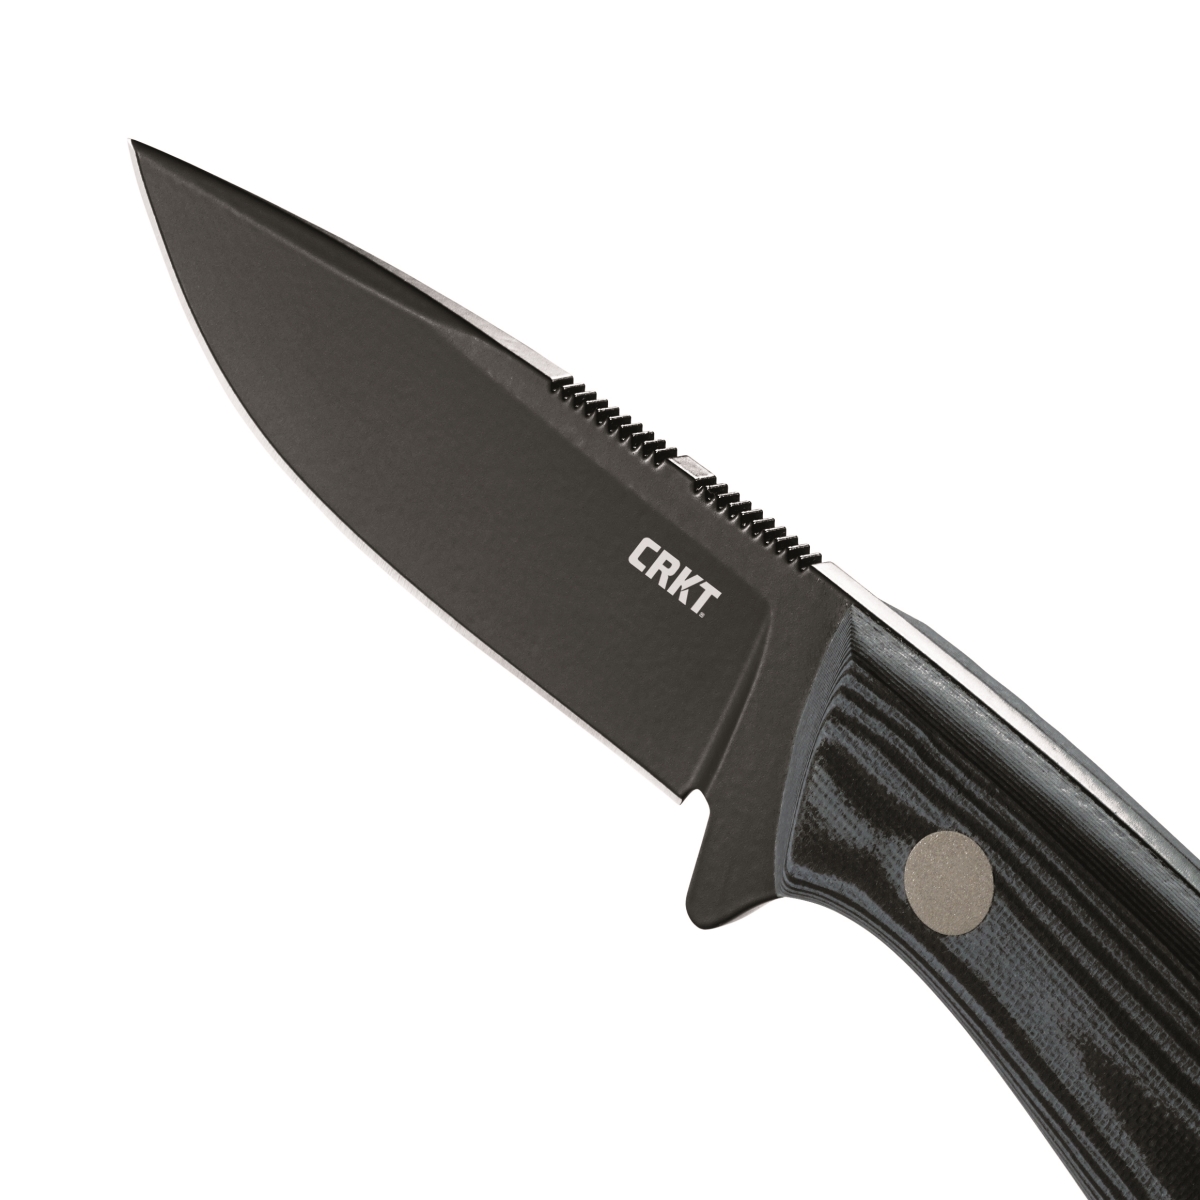 Crk-2831 2019 Mossback Hunter Fixed Blade Knife With Sheath